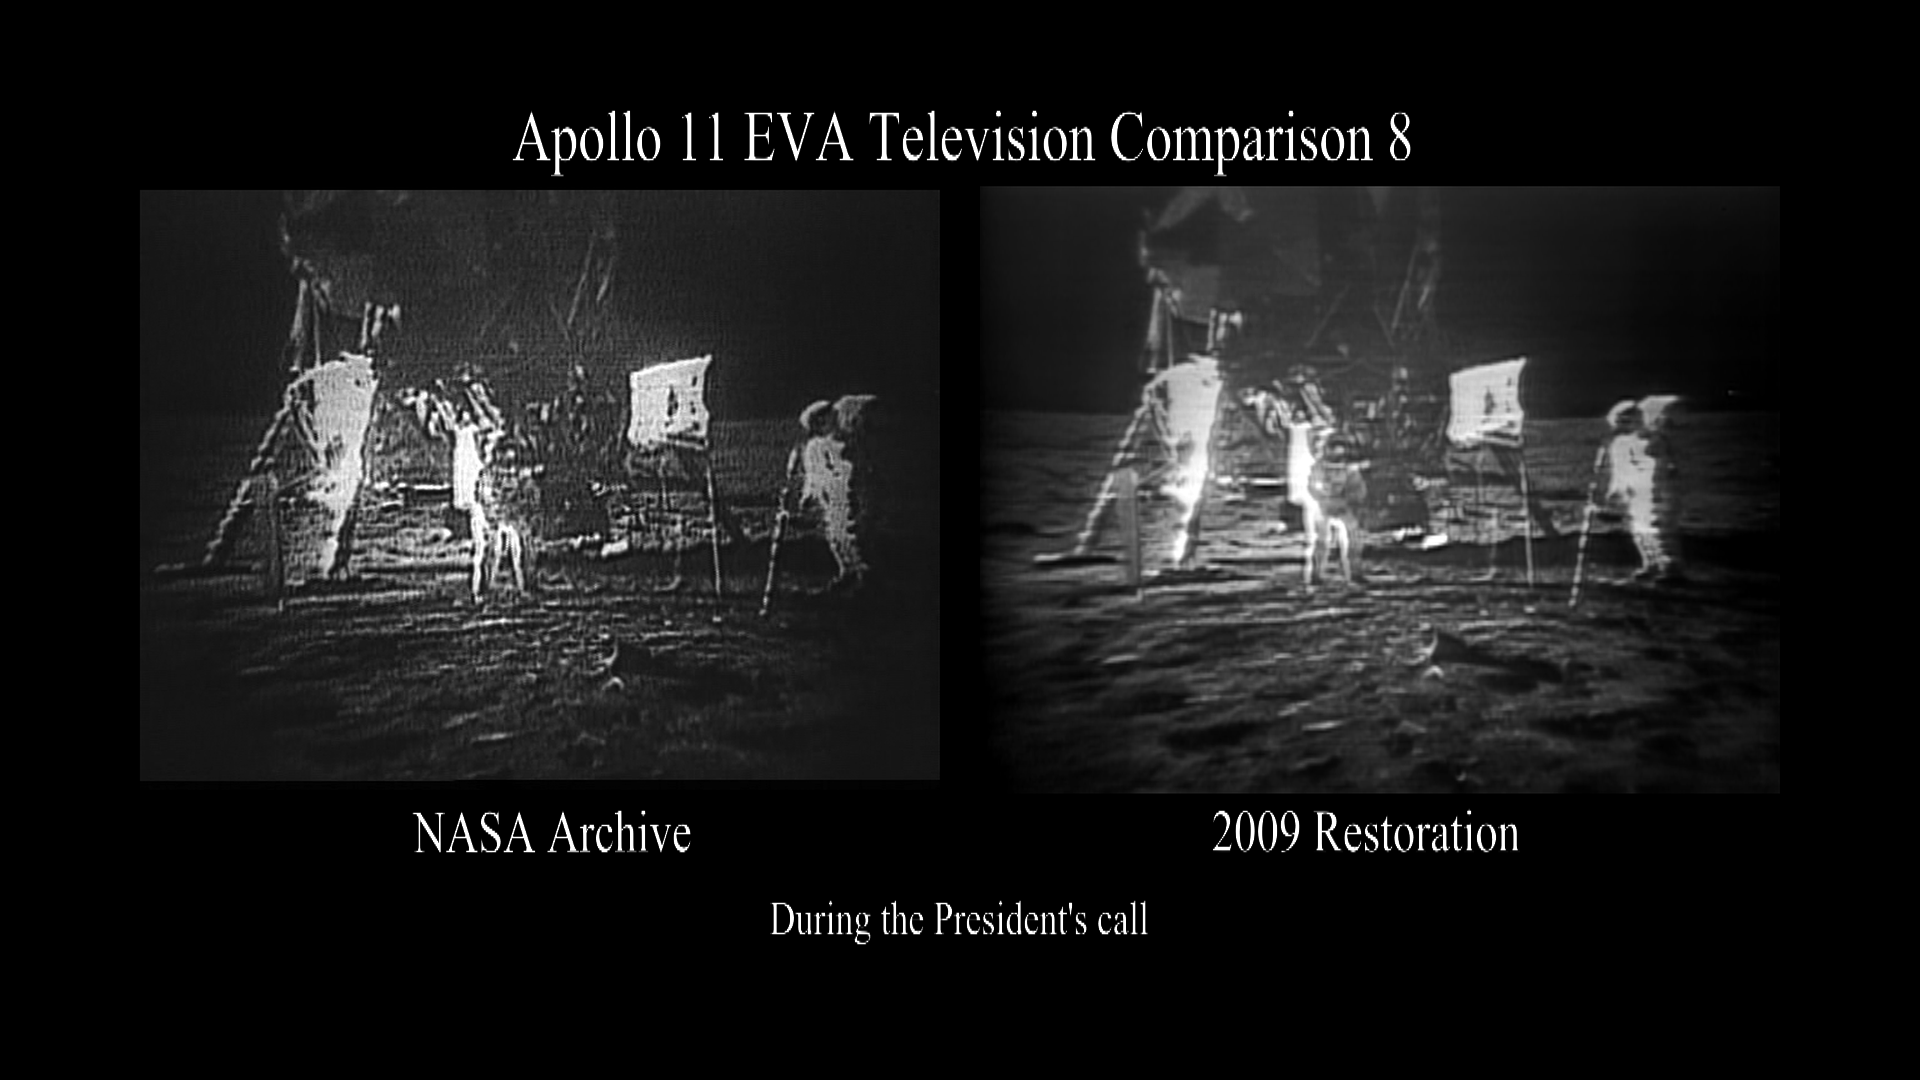 A side by side comparison of the original broadcast video and partially restored video of the astronauts talking with President Nixon.